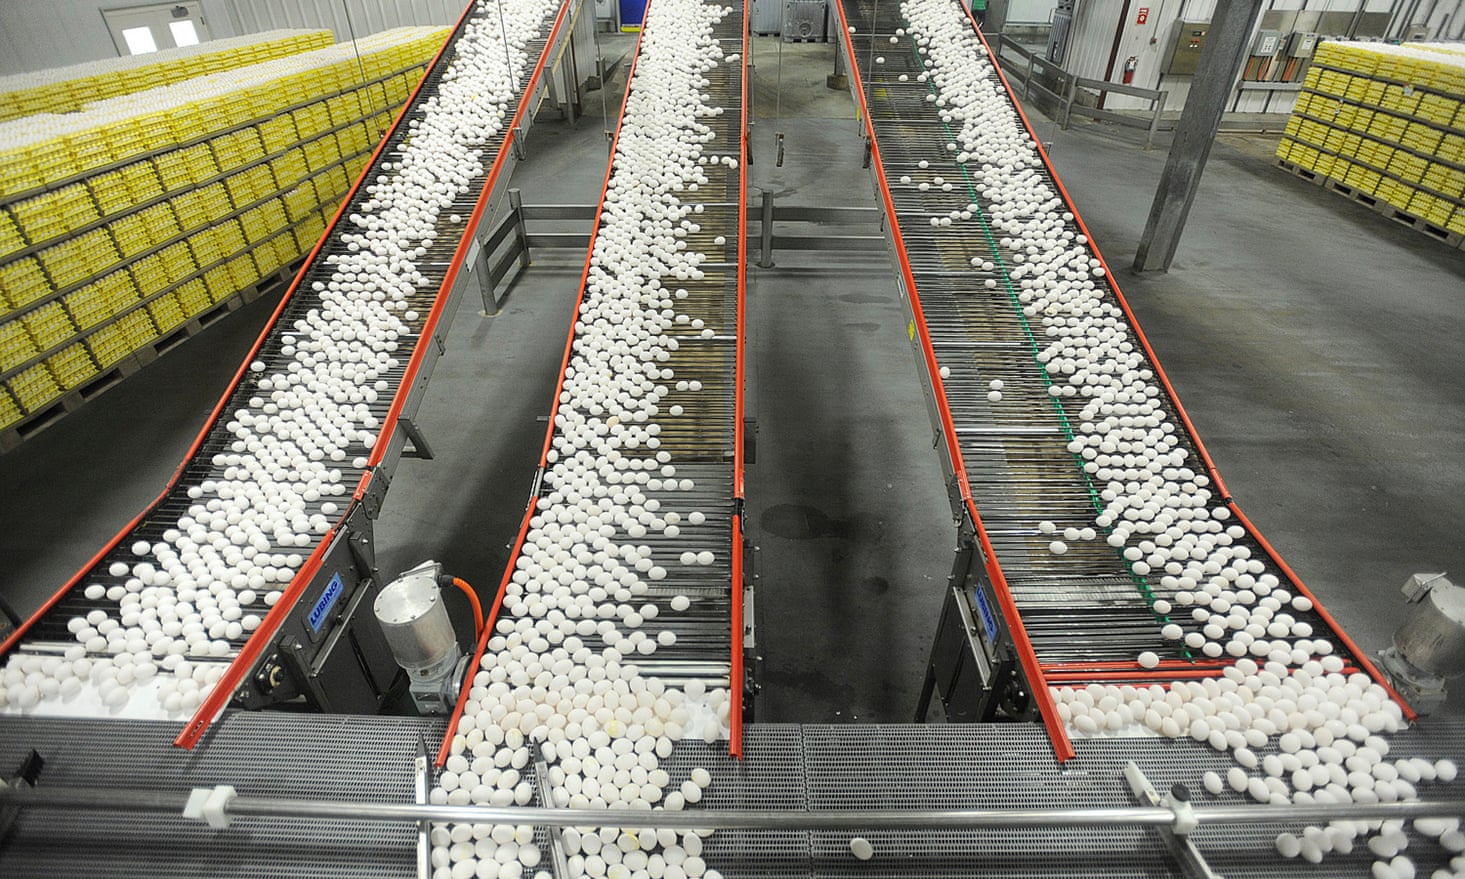 Three conveyor belts conveying hundreds of eggs at a Rose Acre Farms facility.